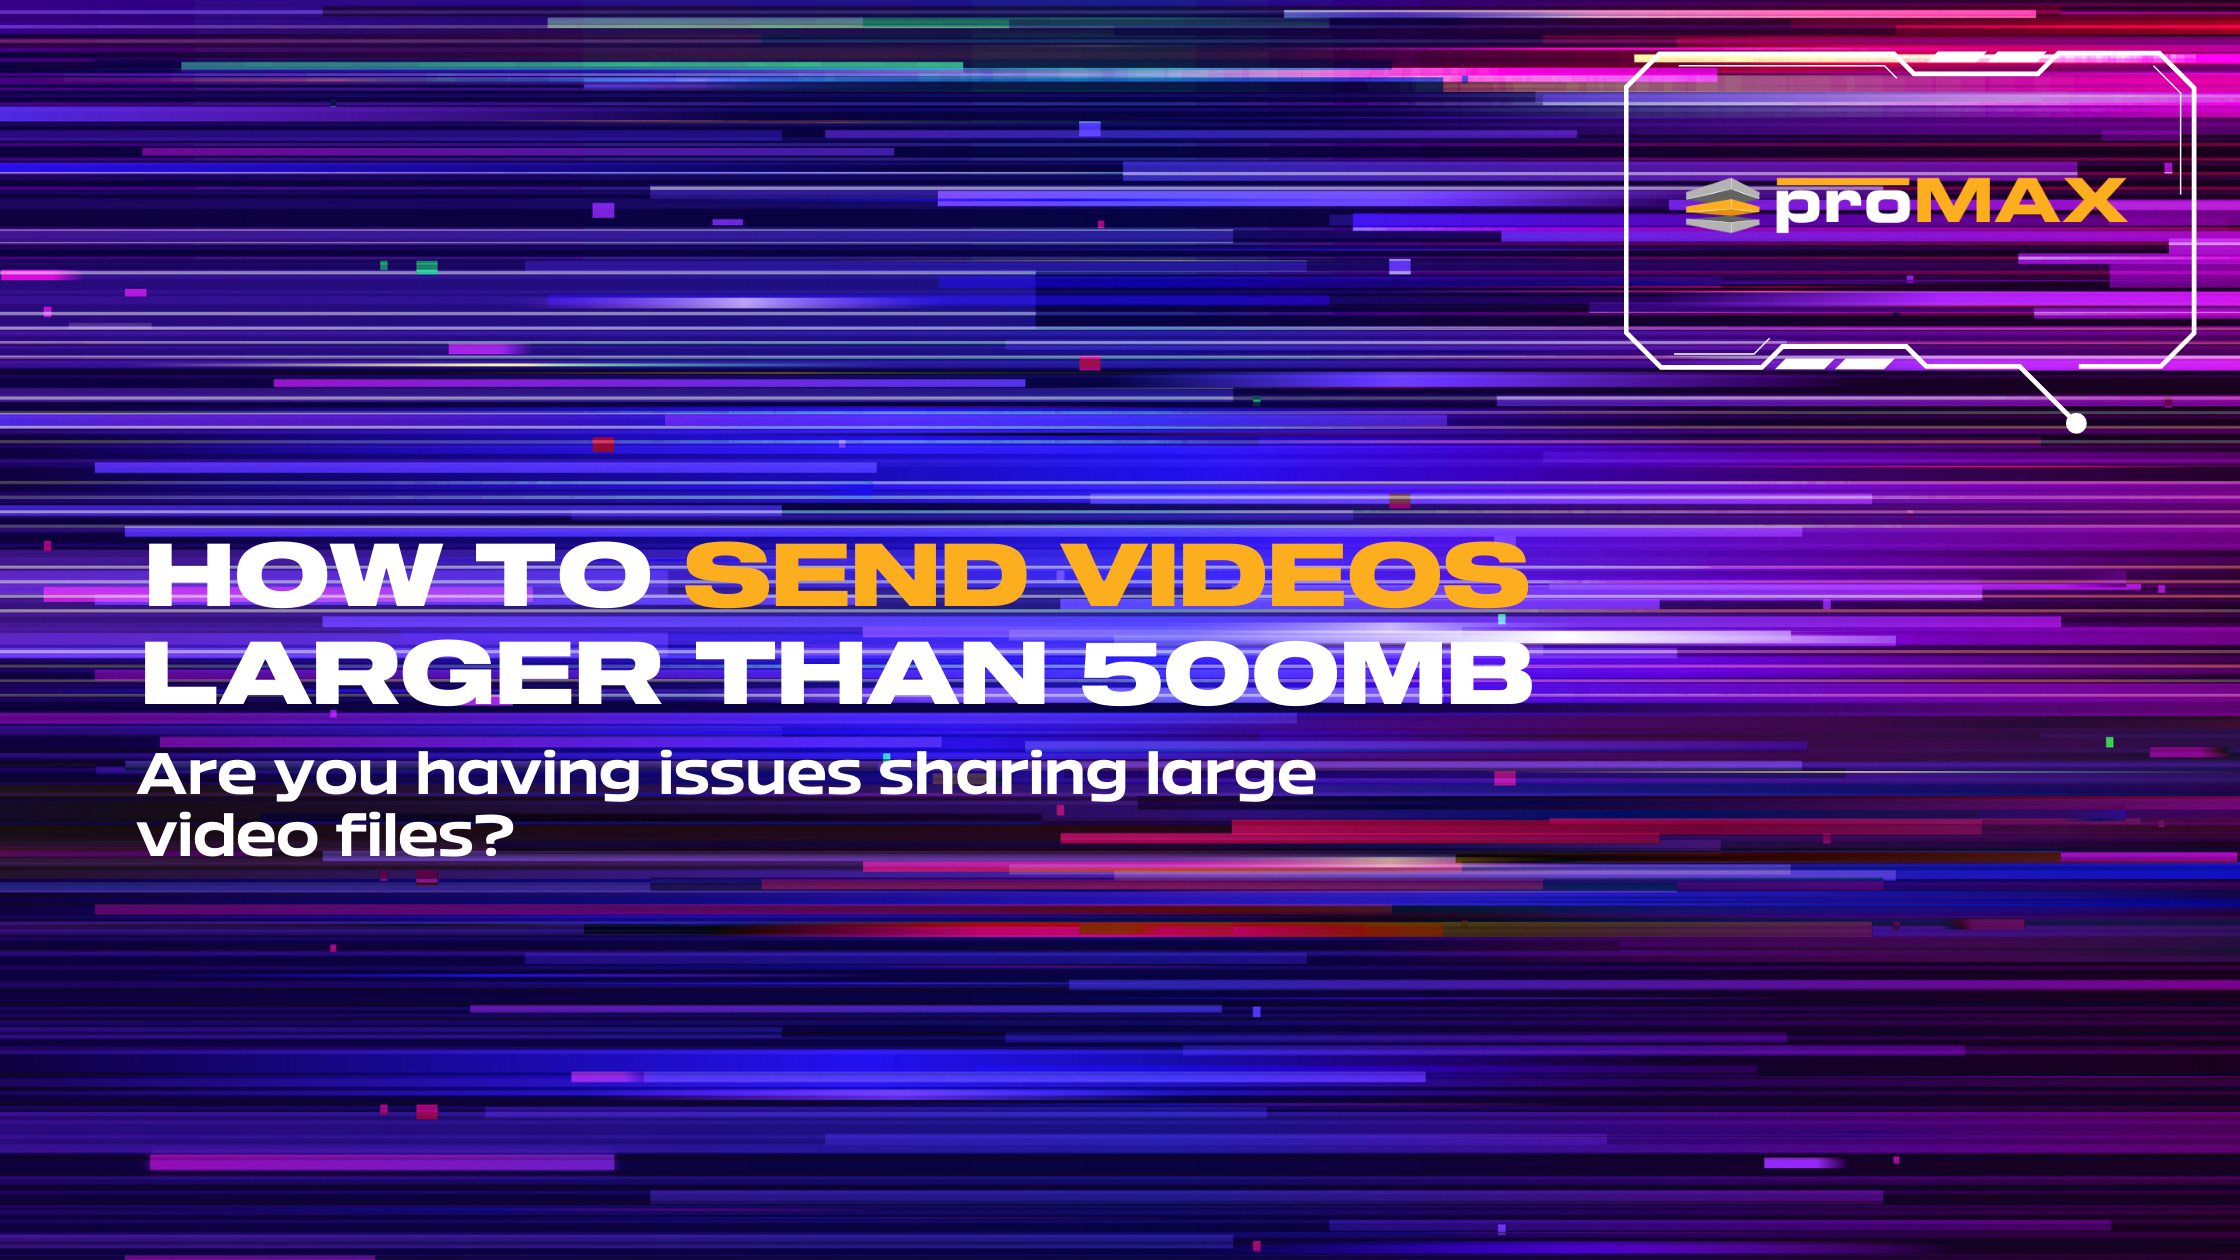 How to Send Video Larger than 500mb